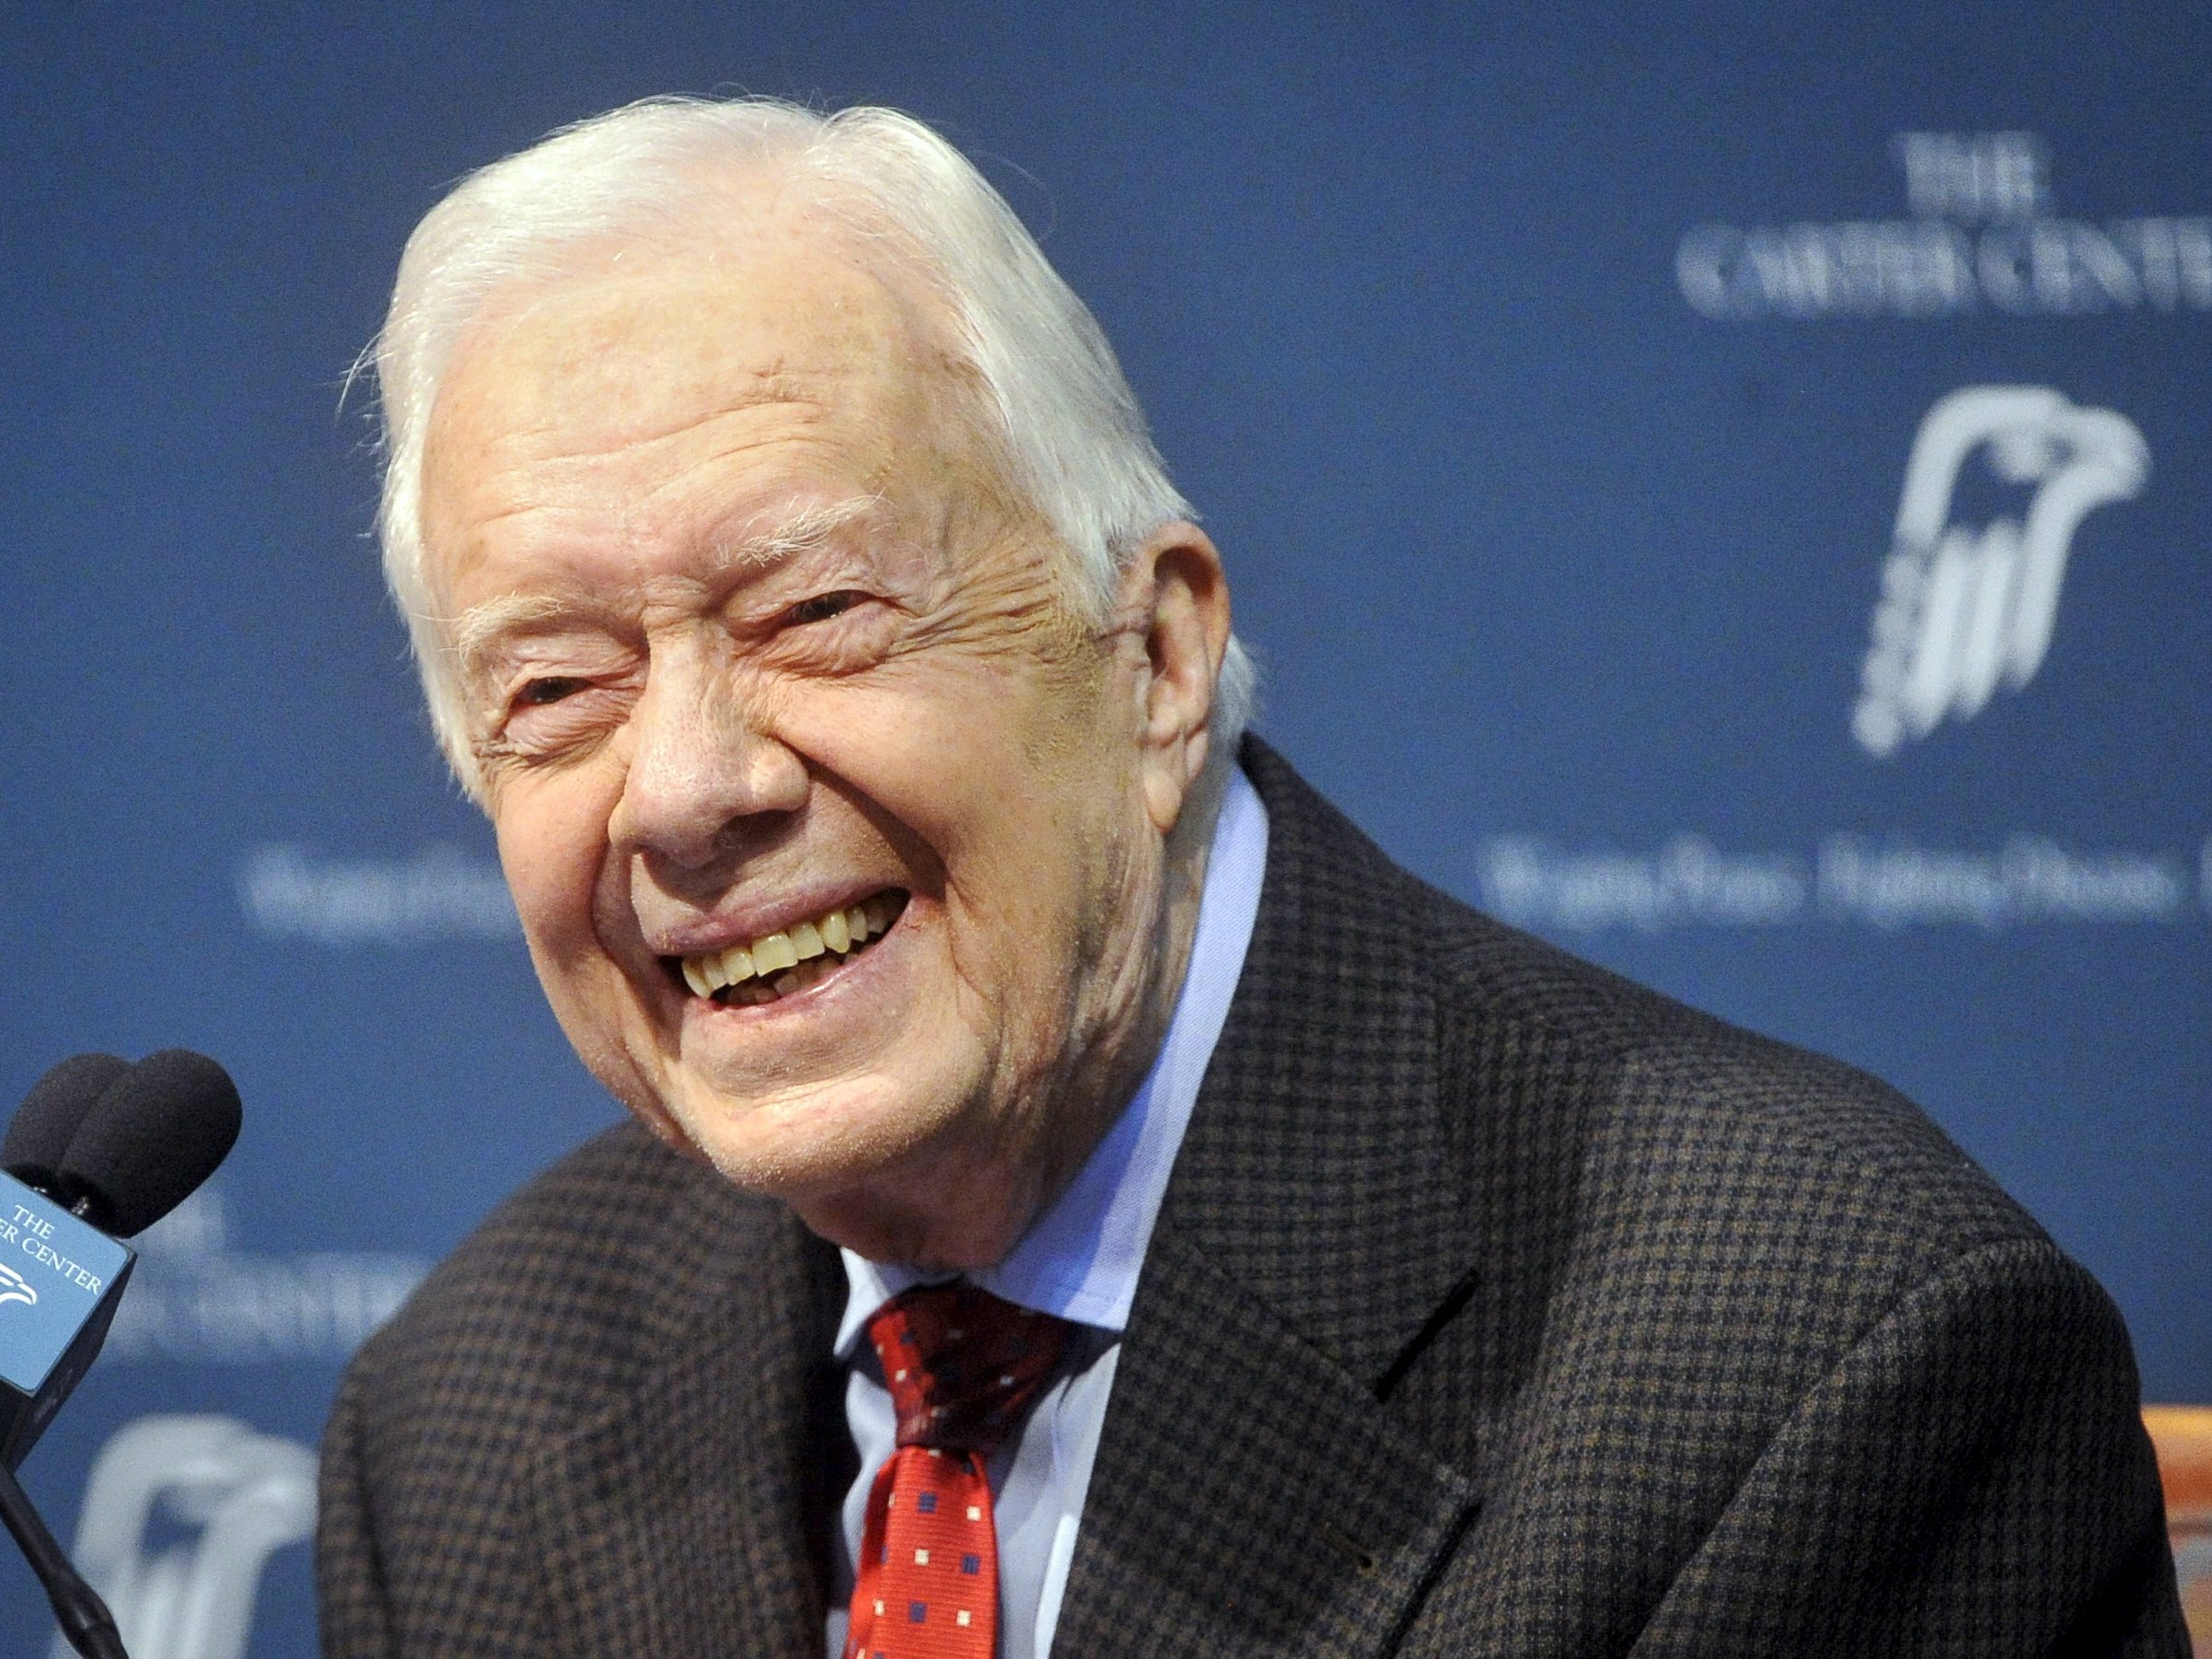 Former U.S. President Jimmy Carter takes questions from the media during a news conference about his recent cancer diagnosis and treatment plans